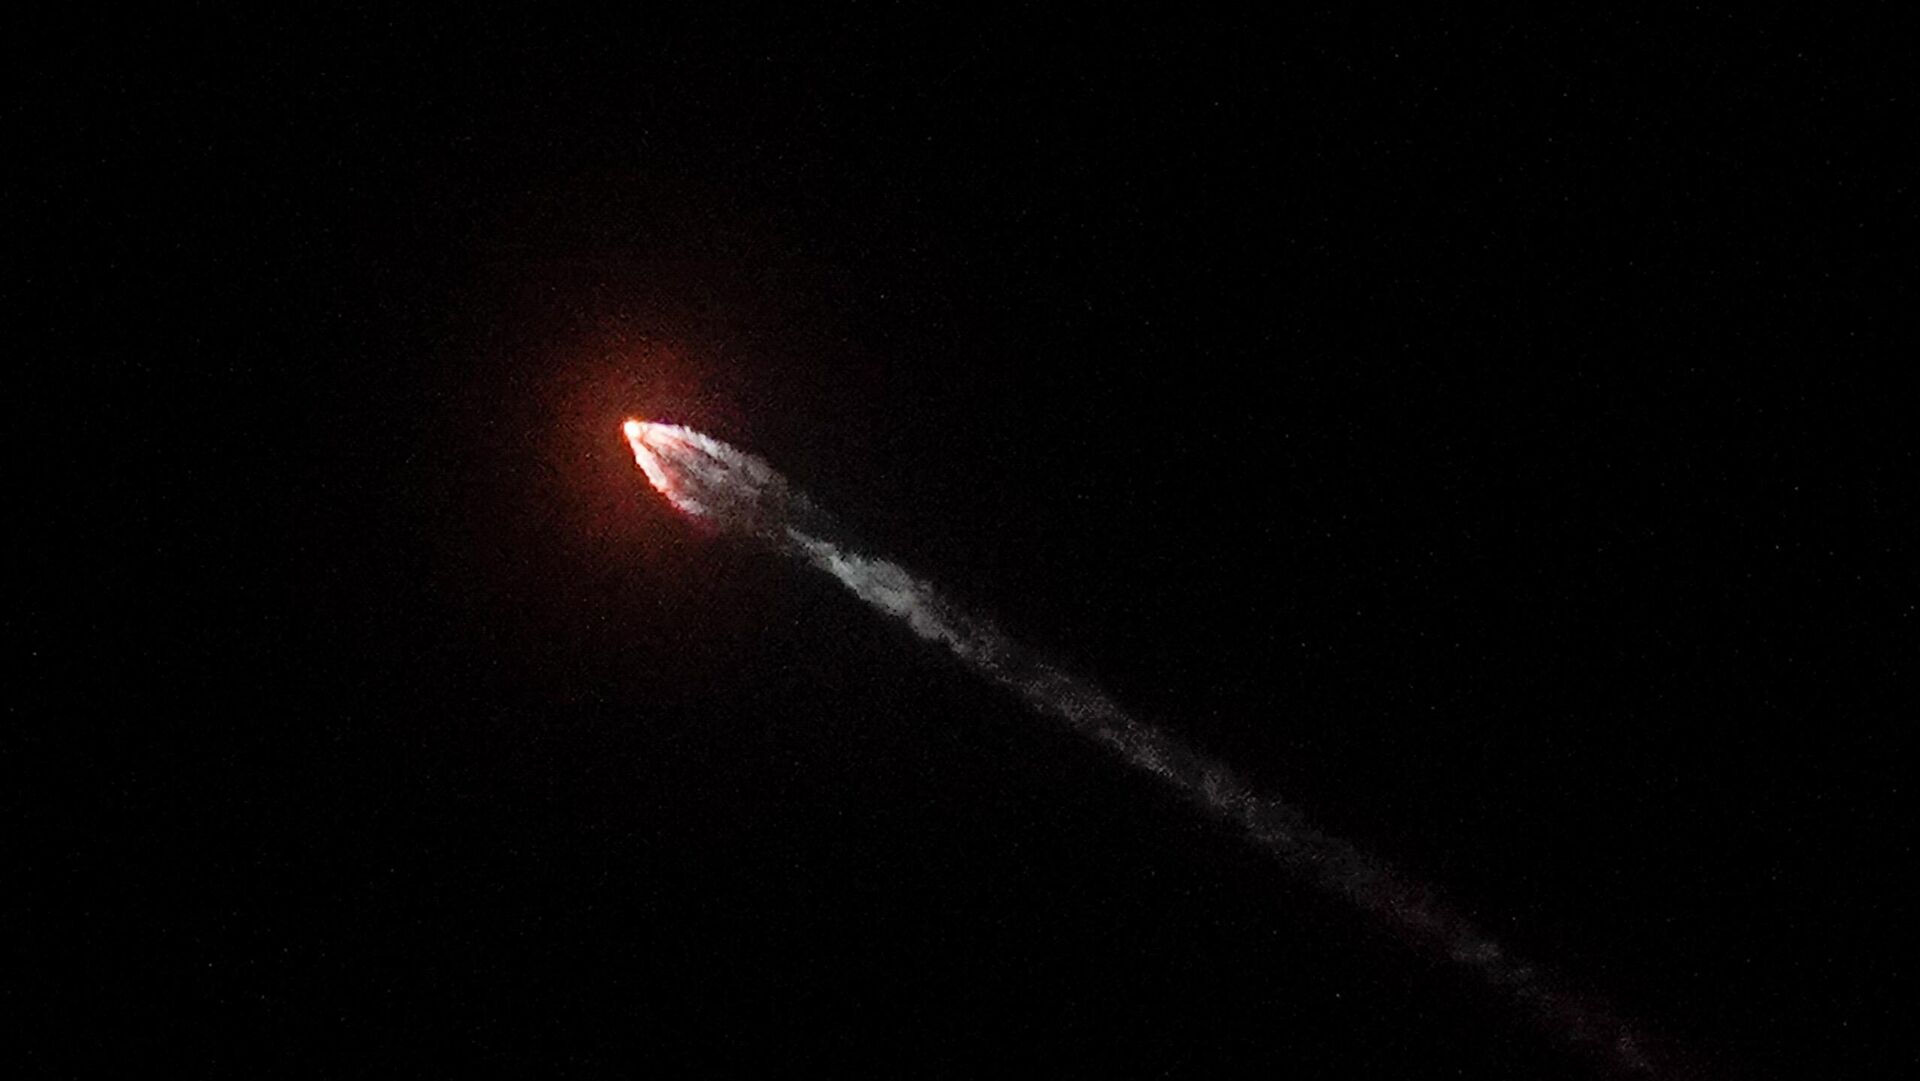 The DART spacecraft, short for Double Asteroid Redirection Test, atop a SpaceX Falcon 9 rocket is seen Tuesday, Nov. 23, 2021, from Simi Valley, Calif. after launching from Vandenberg Space Force Base. - Sputnik International, 1920, 18.09.2022